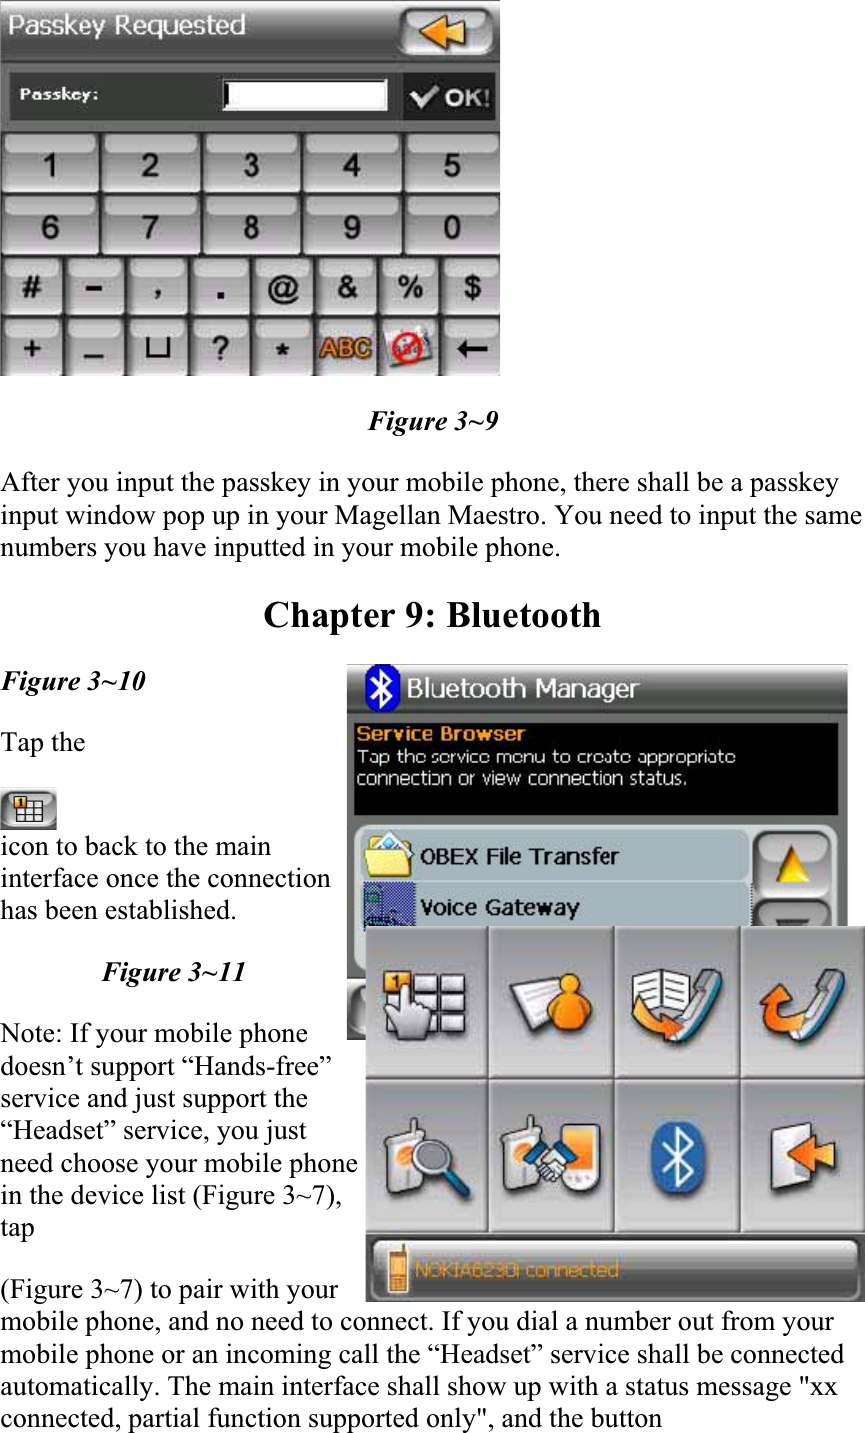 Figure 3~9 After you input the passkey in your mobile phone, there shall be a passkey input window pop up in your Magellan Maestro. You need to input the same numbers you have inputted in your mobile phone.  Chapter 9: Bluetooth Figure 3~10 Tap theicon to back to the main interface once the connection has been established.  Figure 3~11 Note: If your mobile phone doesn’t support “Hands-free” service and just support the “Headset” service, you just need choose your mobile phone in the device list (Figure 3~7), tap(Figure 3~7) to pair with your mobile phone, and no need to connect. If you dial a number out from your mobile phone or an incoming call the “Headset” service shall be connected automatically. The main interface shall show up with a status message &quot;xx connected, partial function supported only&quot;, and the button  